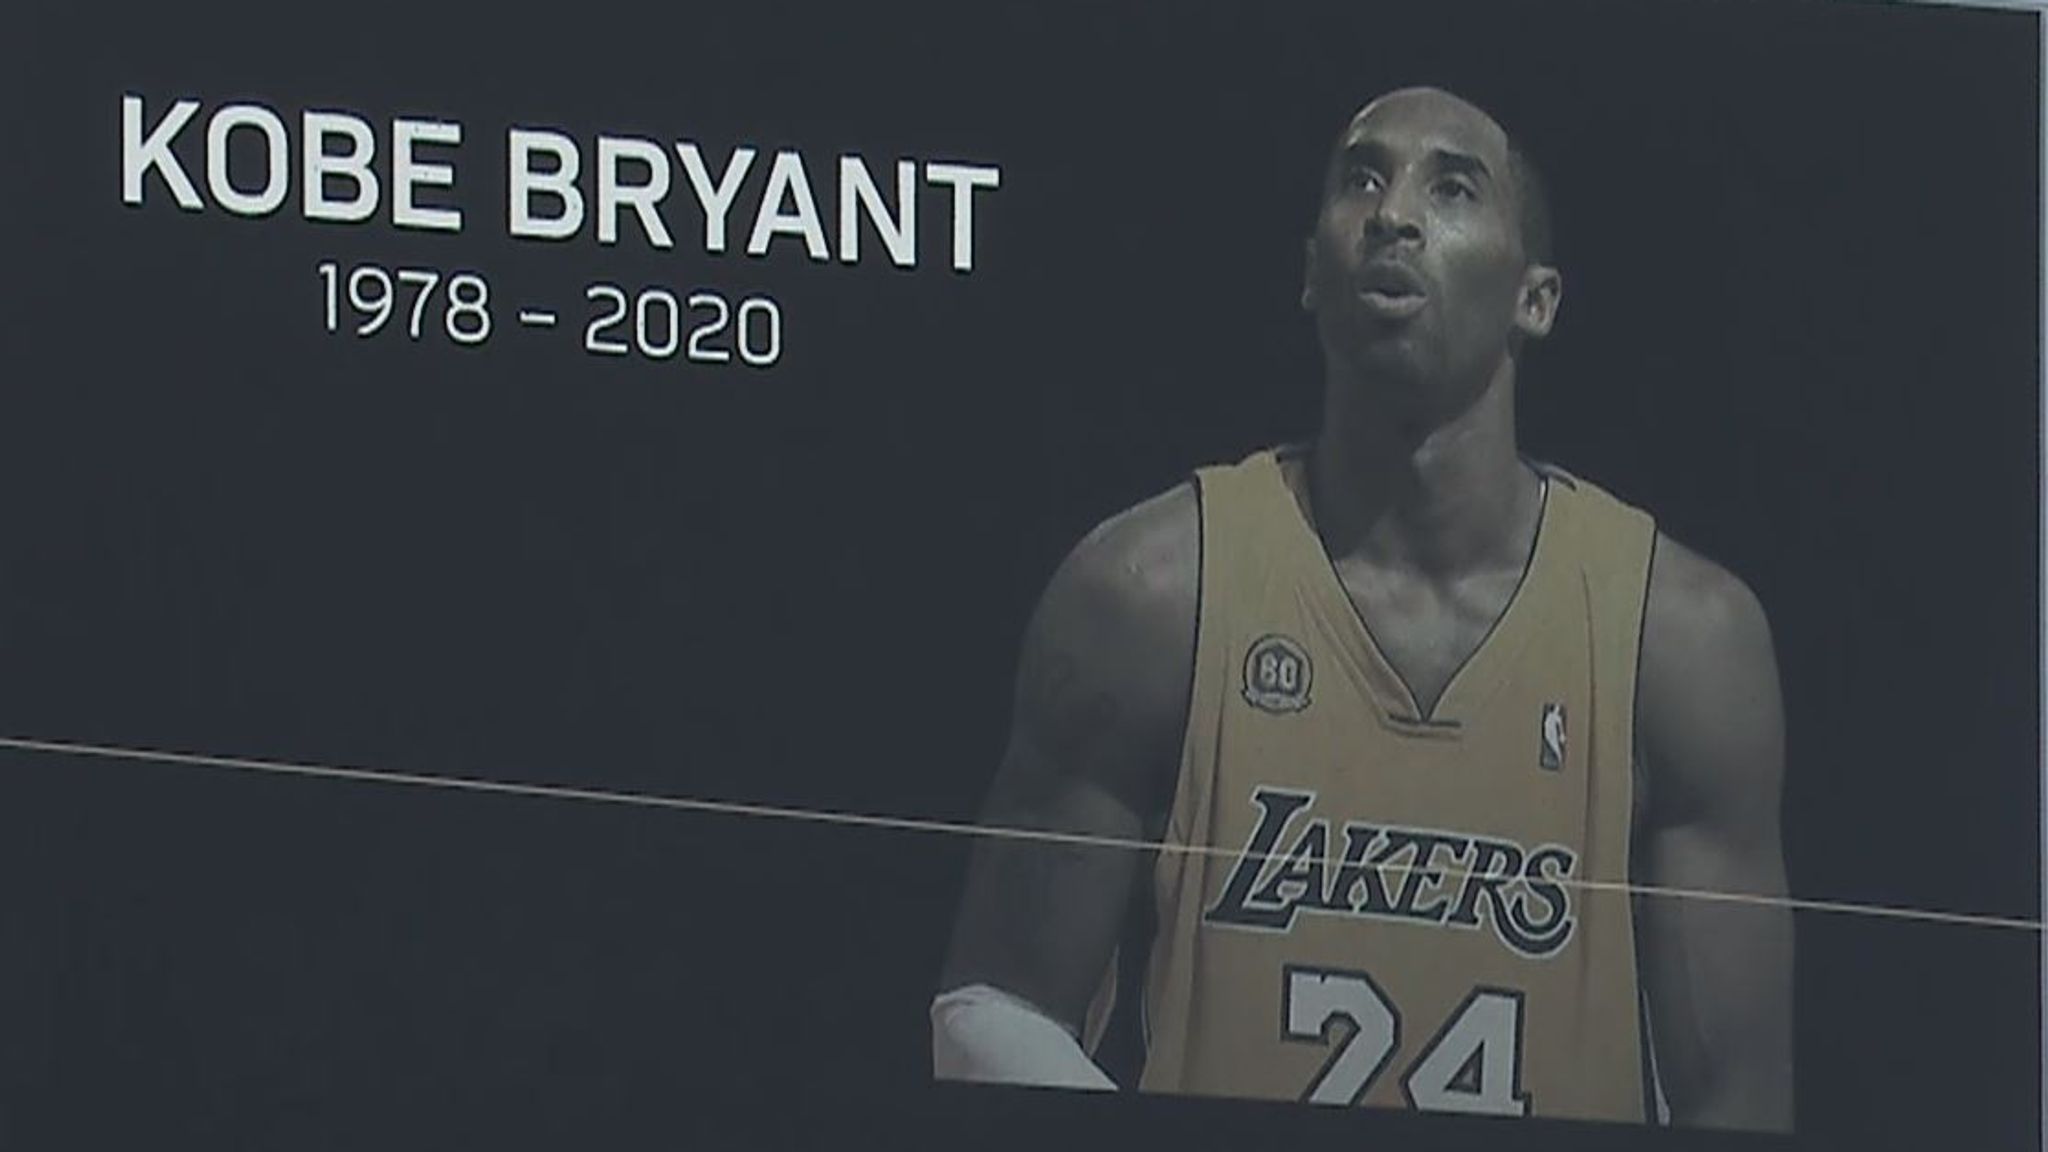 Kobe Bryant career is about to end, but his legacy will live on forever 